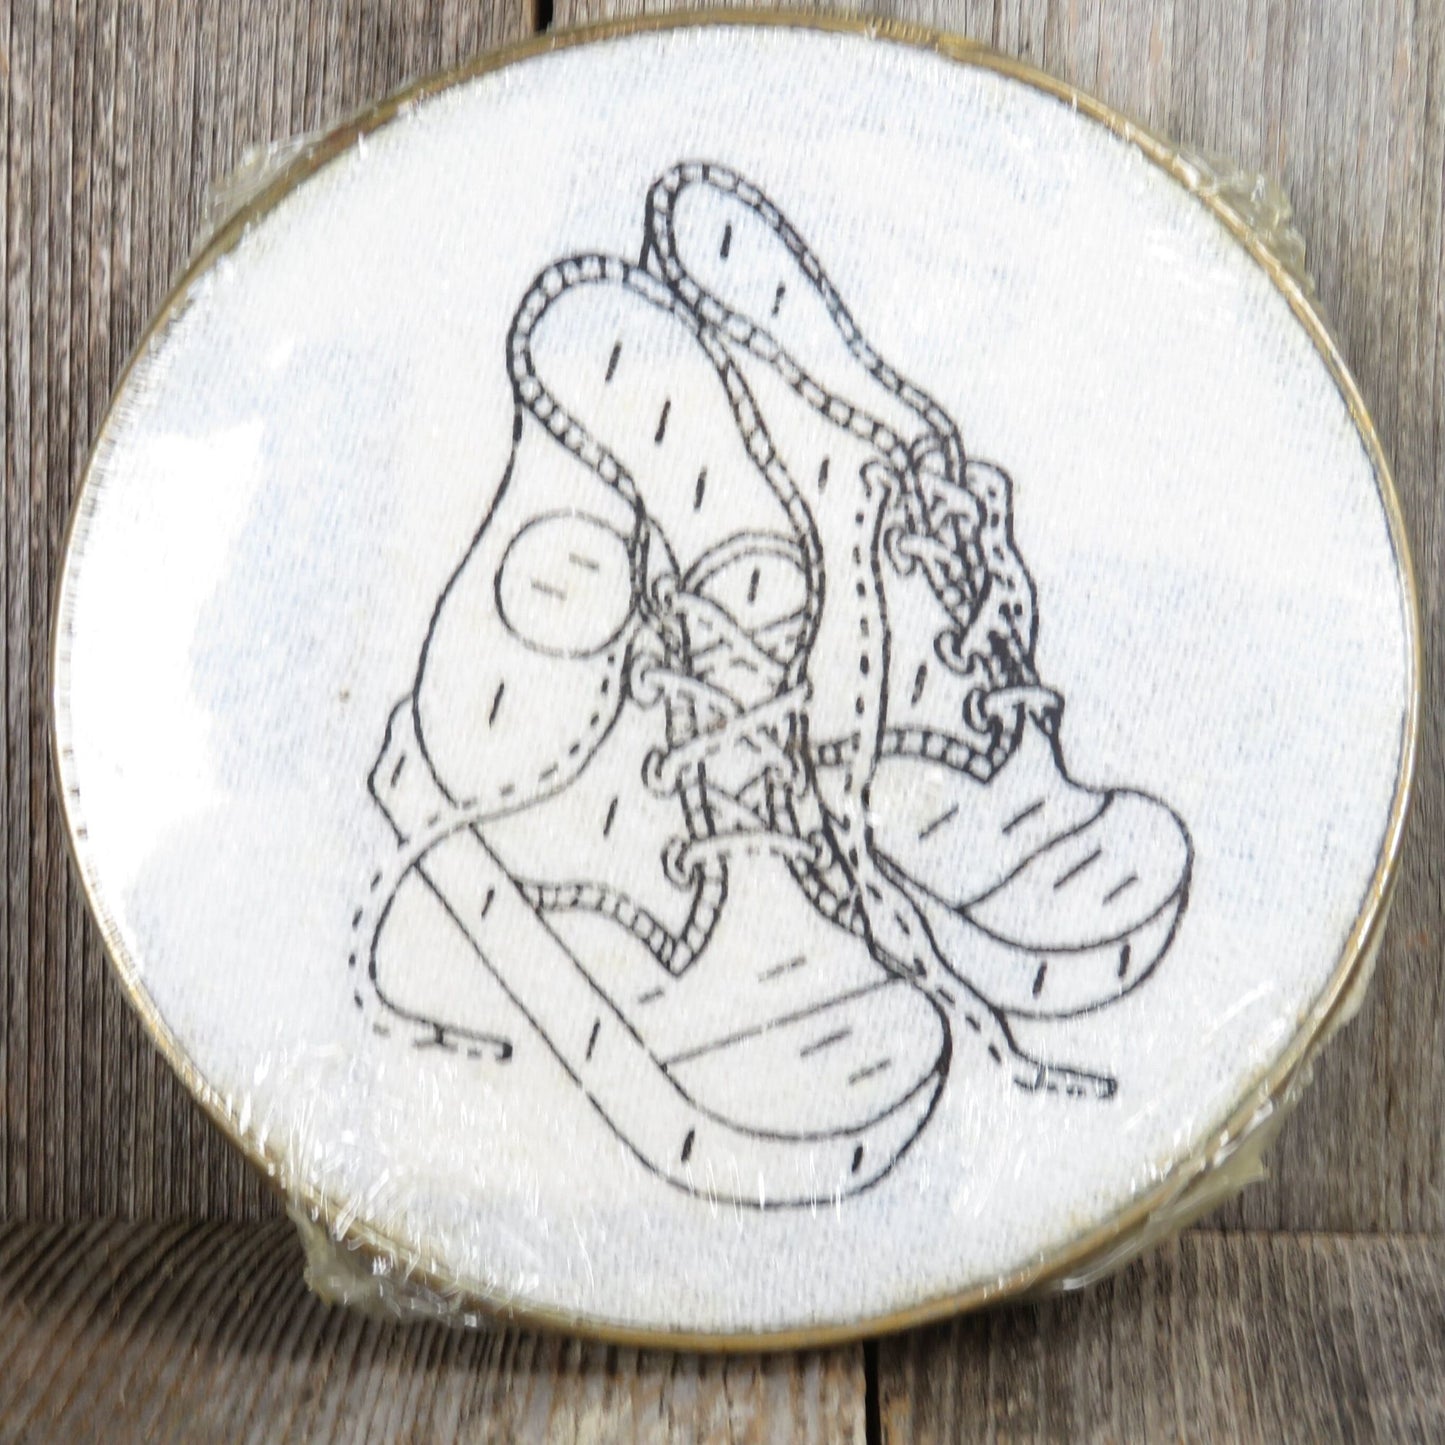 Blue Booty Sneaker Stitch It Framed Picture Kit Embroidery A. B. Brian Inc Vintage Kicks Baby Shower Gift